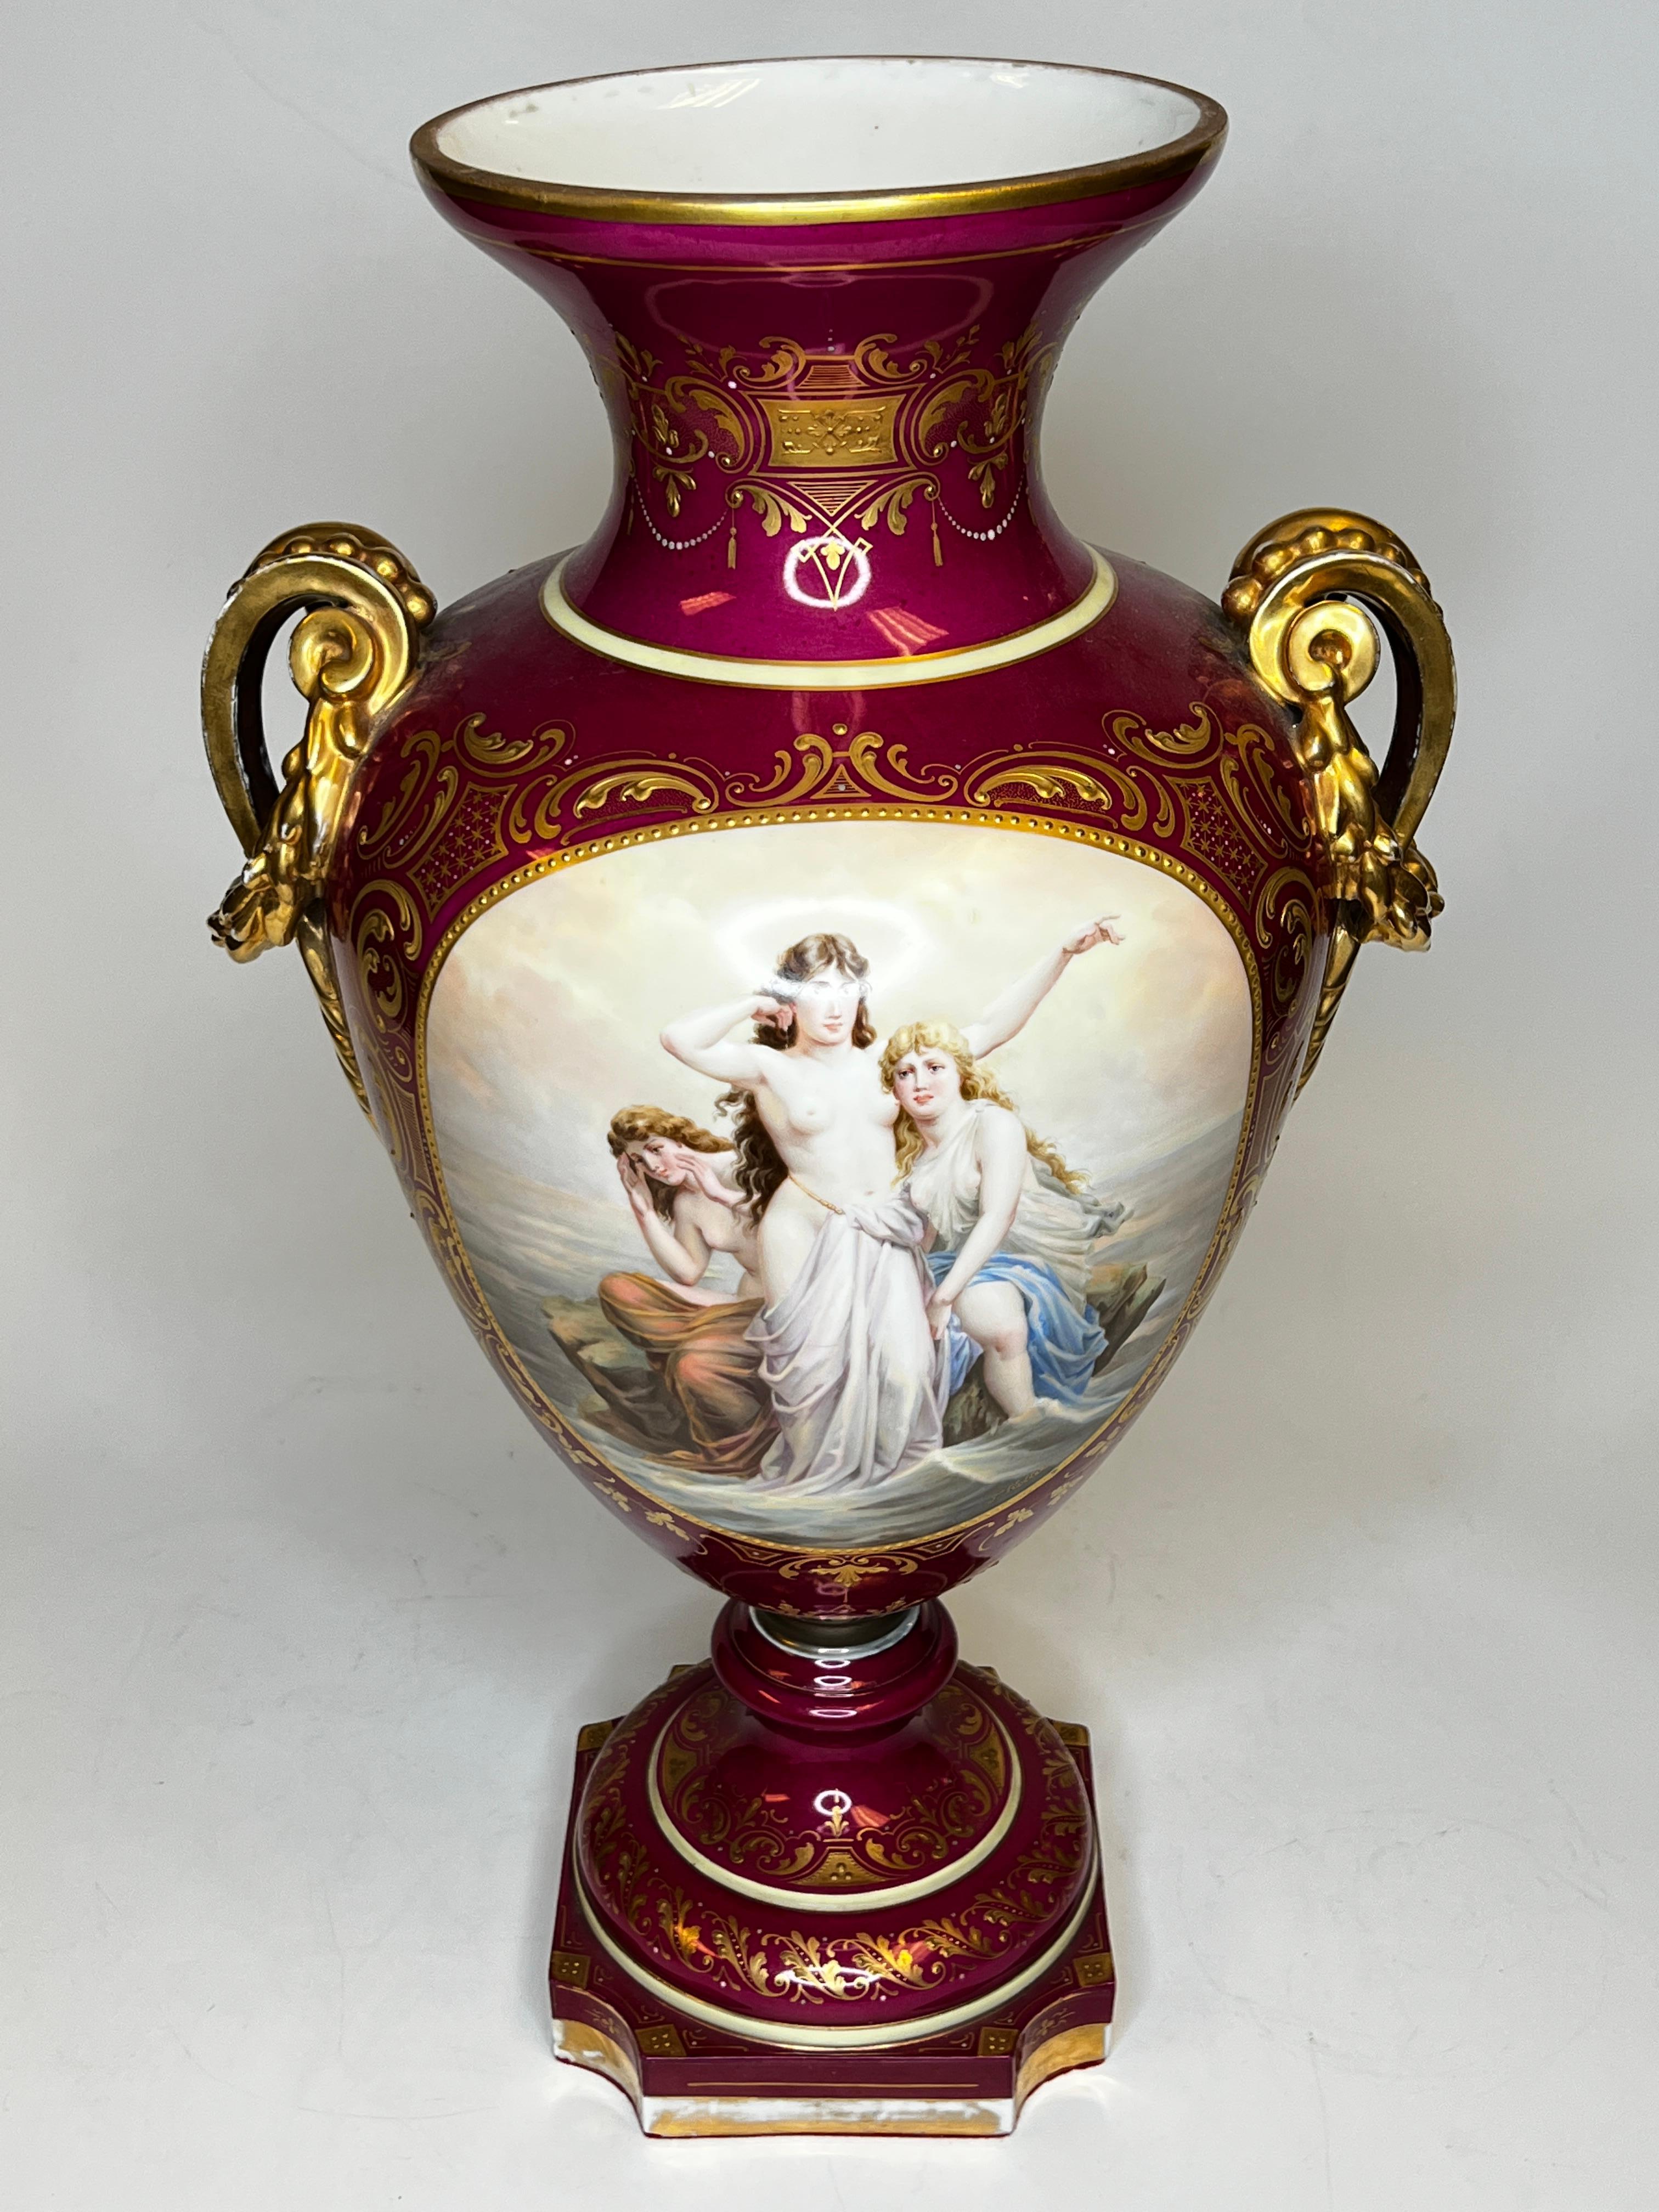 Very fine quality 19 century hand painted Royal Vienna Porcelain Vase in the Neoclassical Style.
The painting signed F. KOLLER.